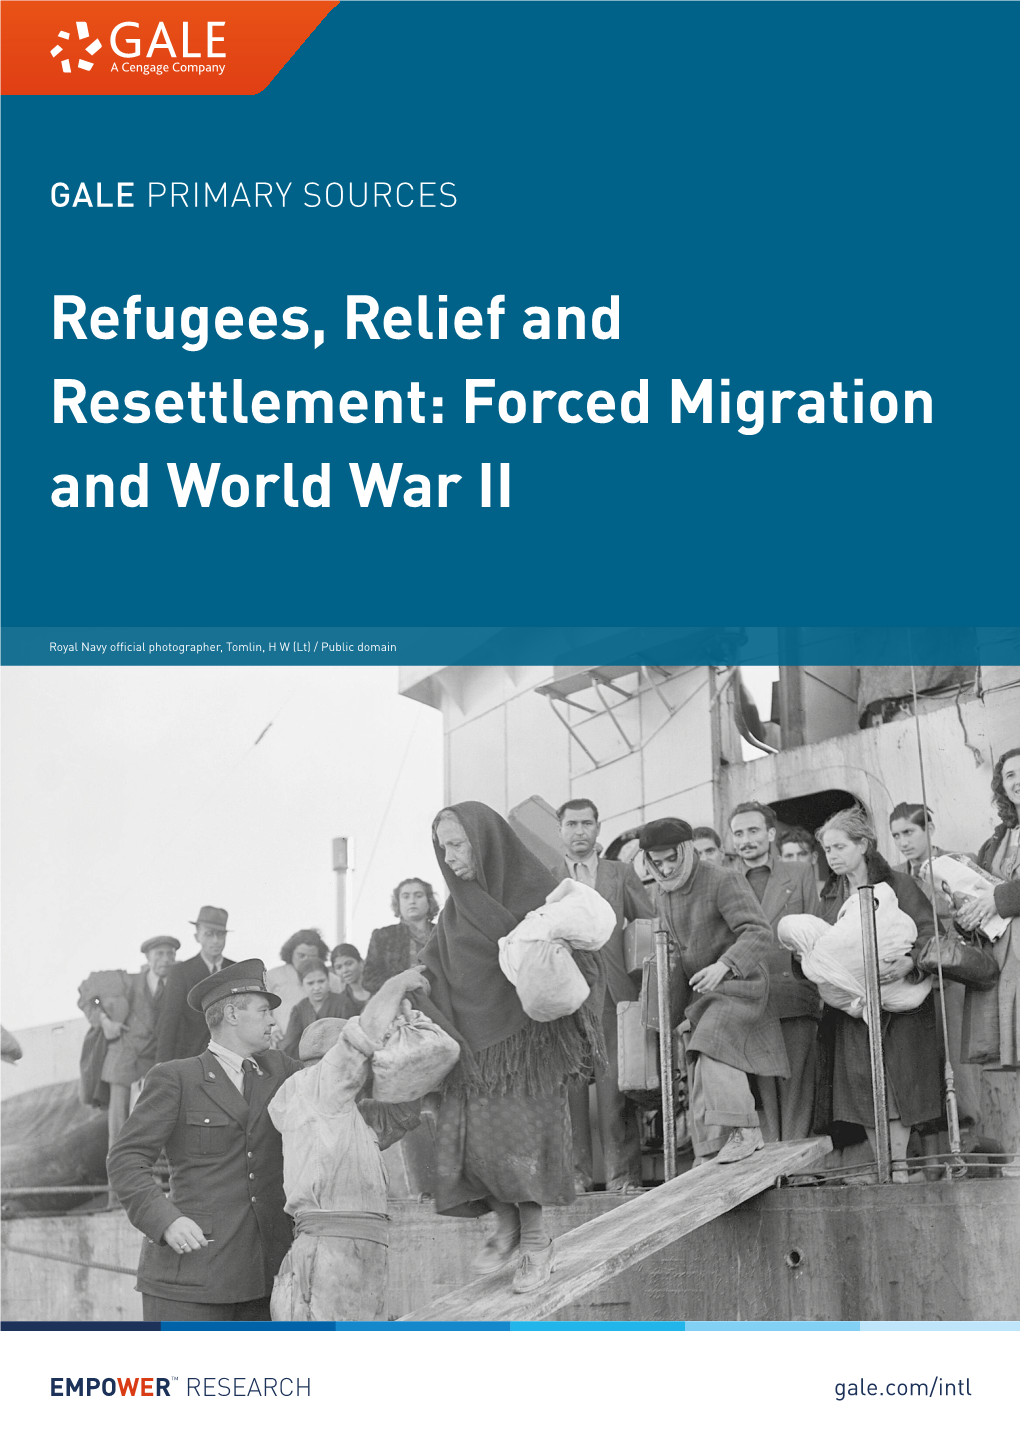 Refugees, Relief and Resettlement: Forced Migration and World War II